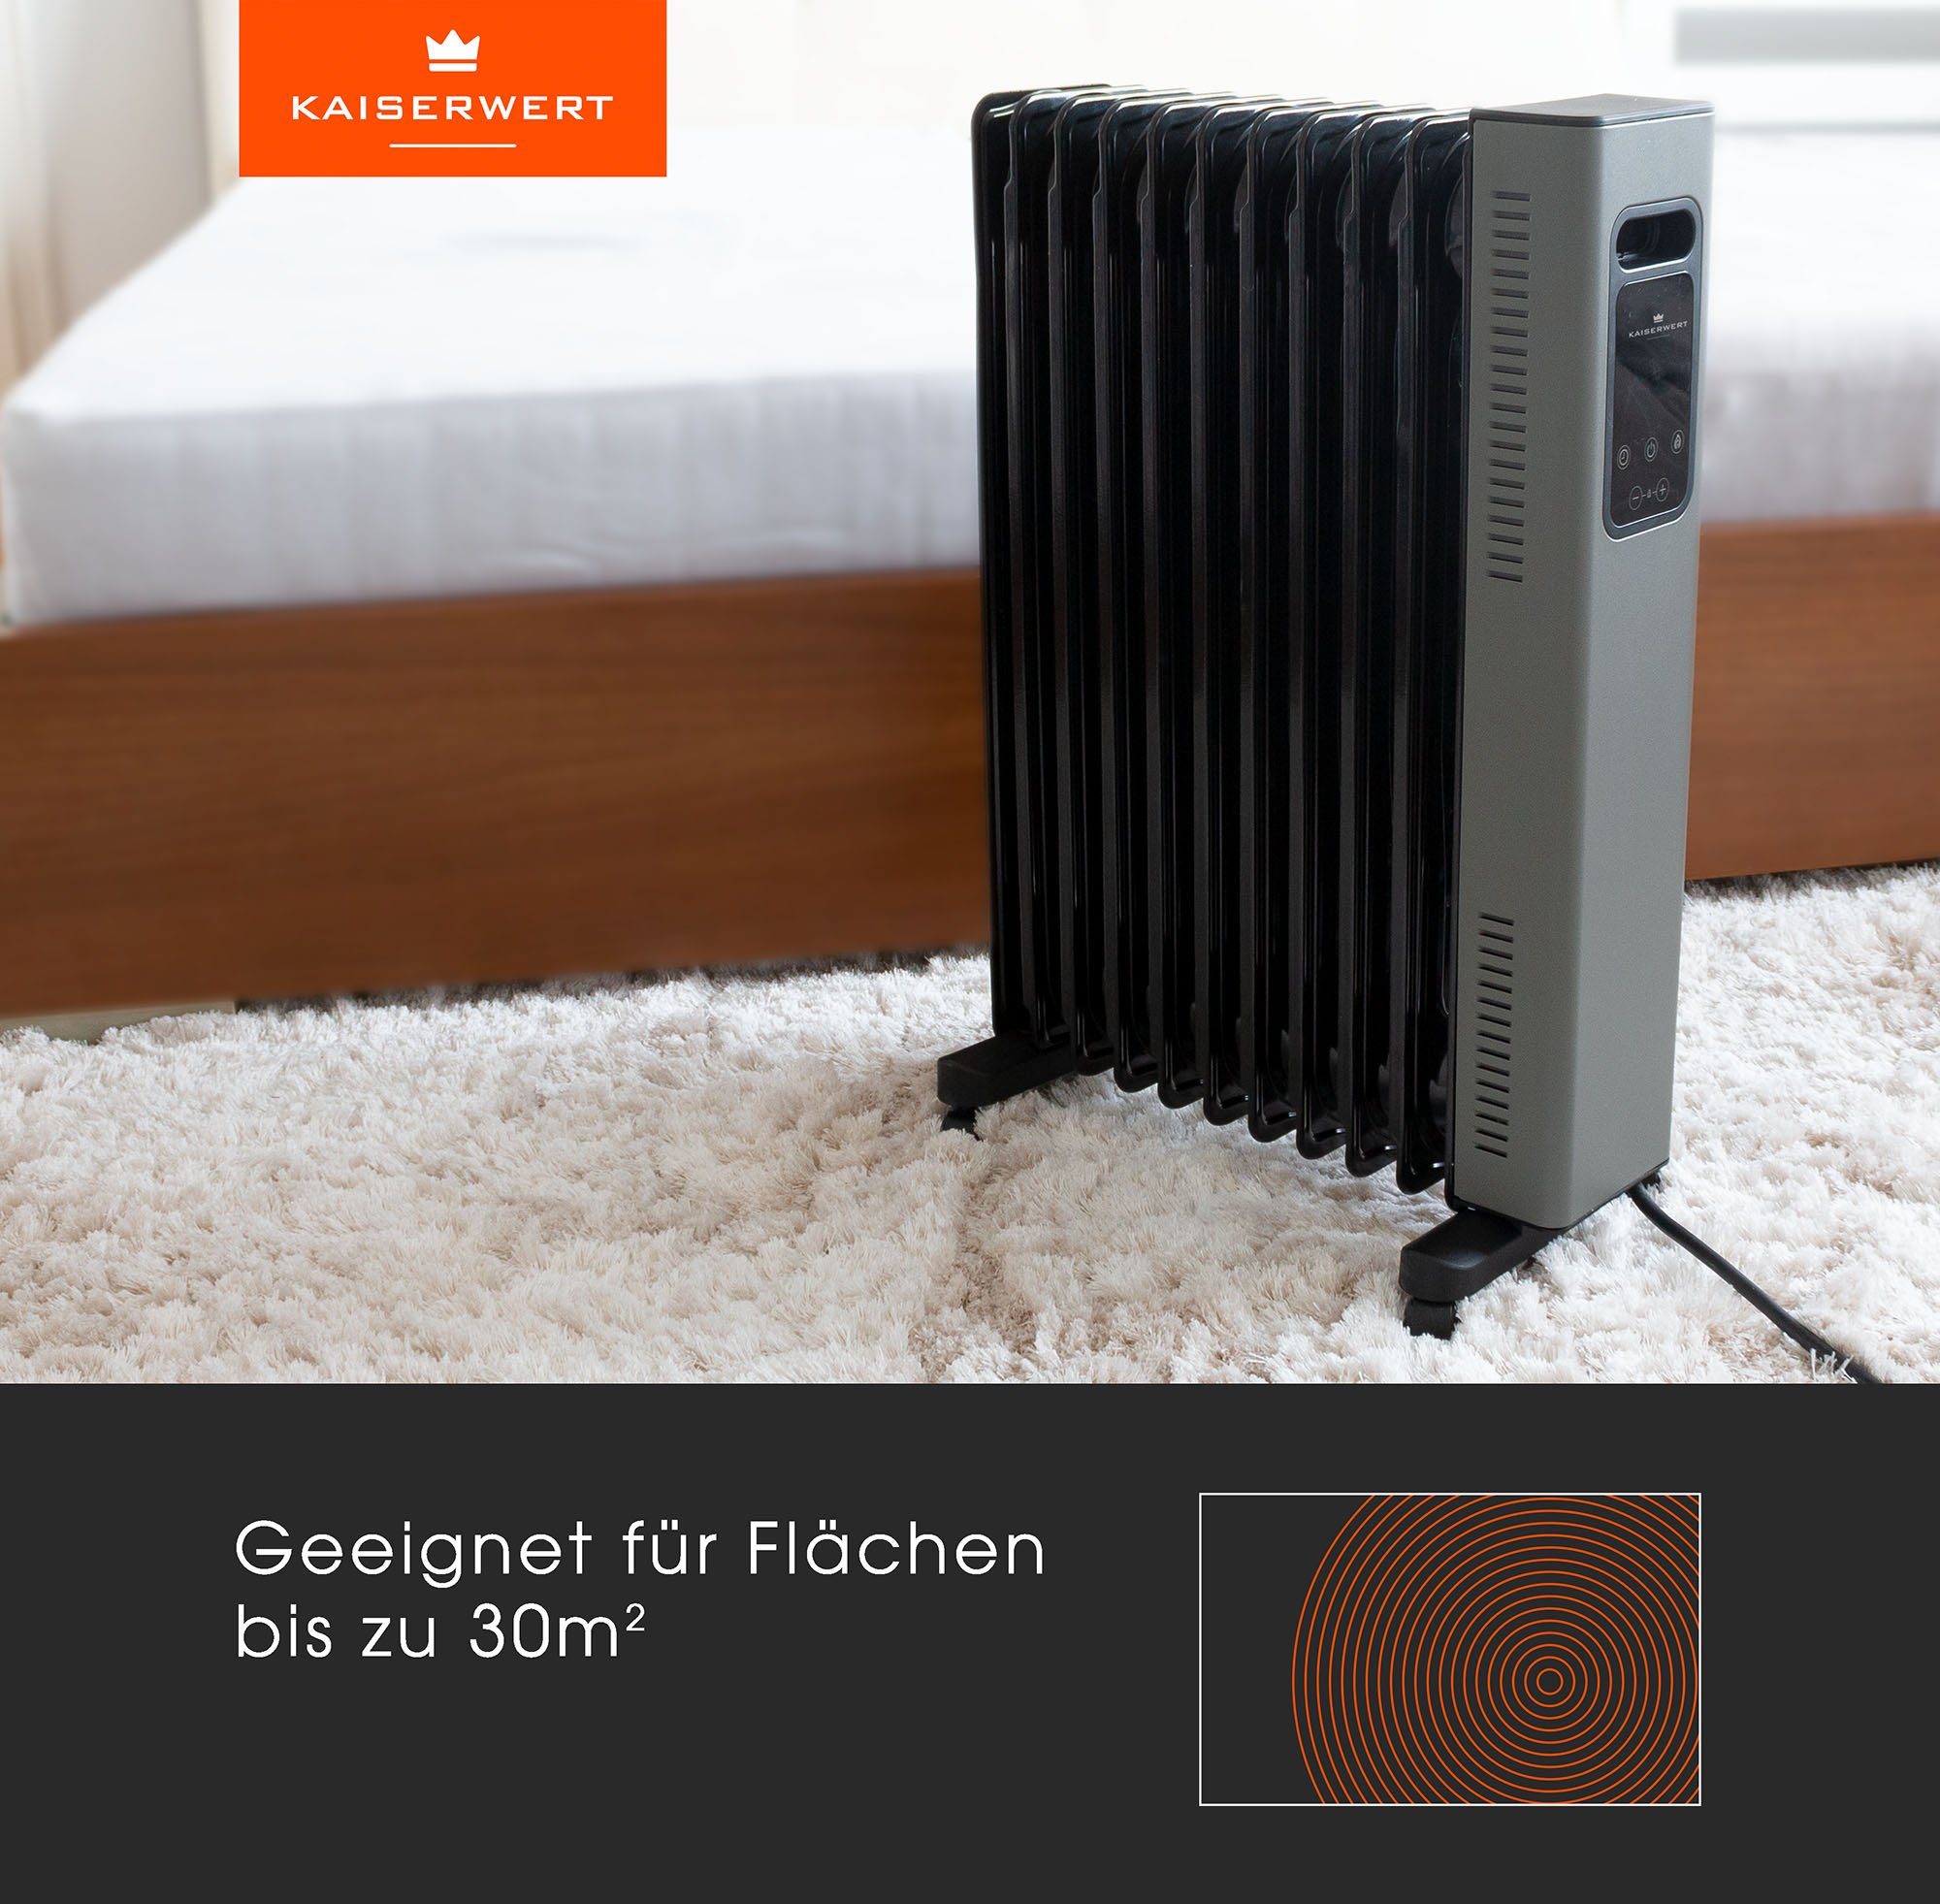 Kaiserwert Ölradiator Deluxe, 2500 Rippen, Touch-Display, 11 W, Memory-Funktion 24h-Timer, Thermostat